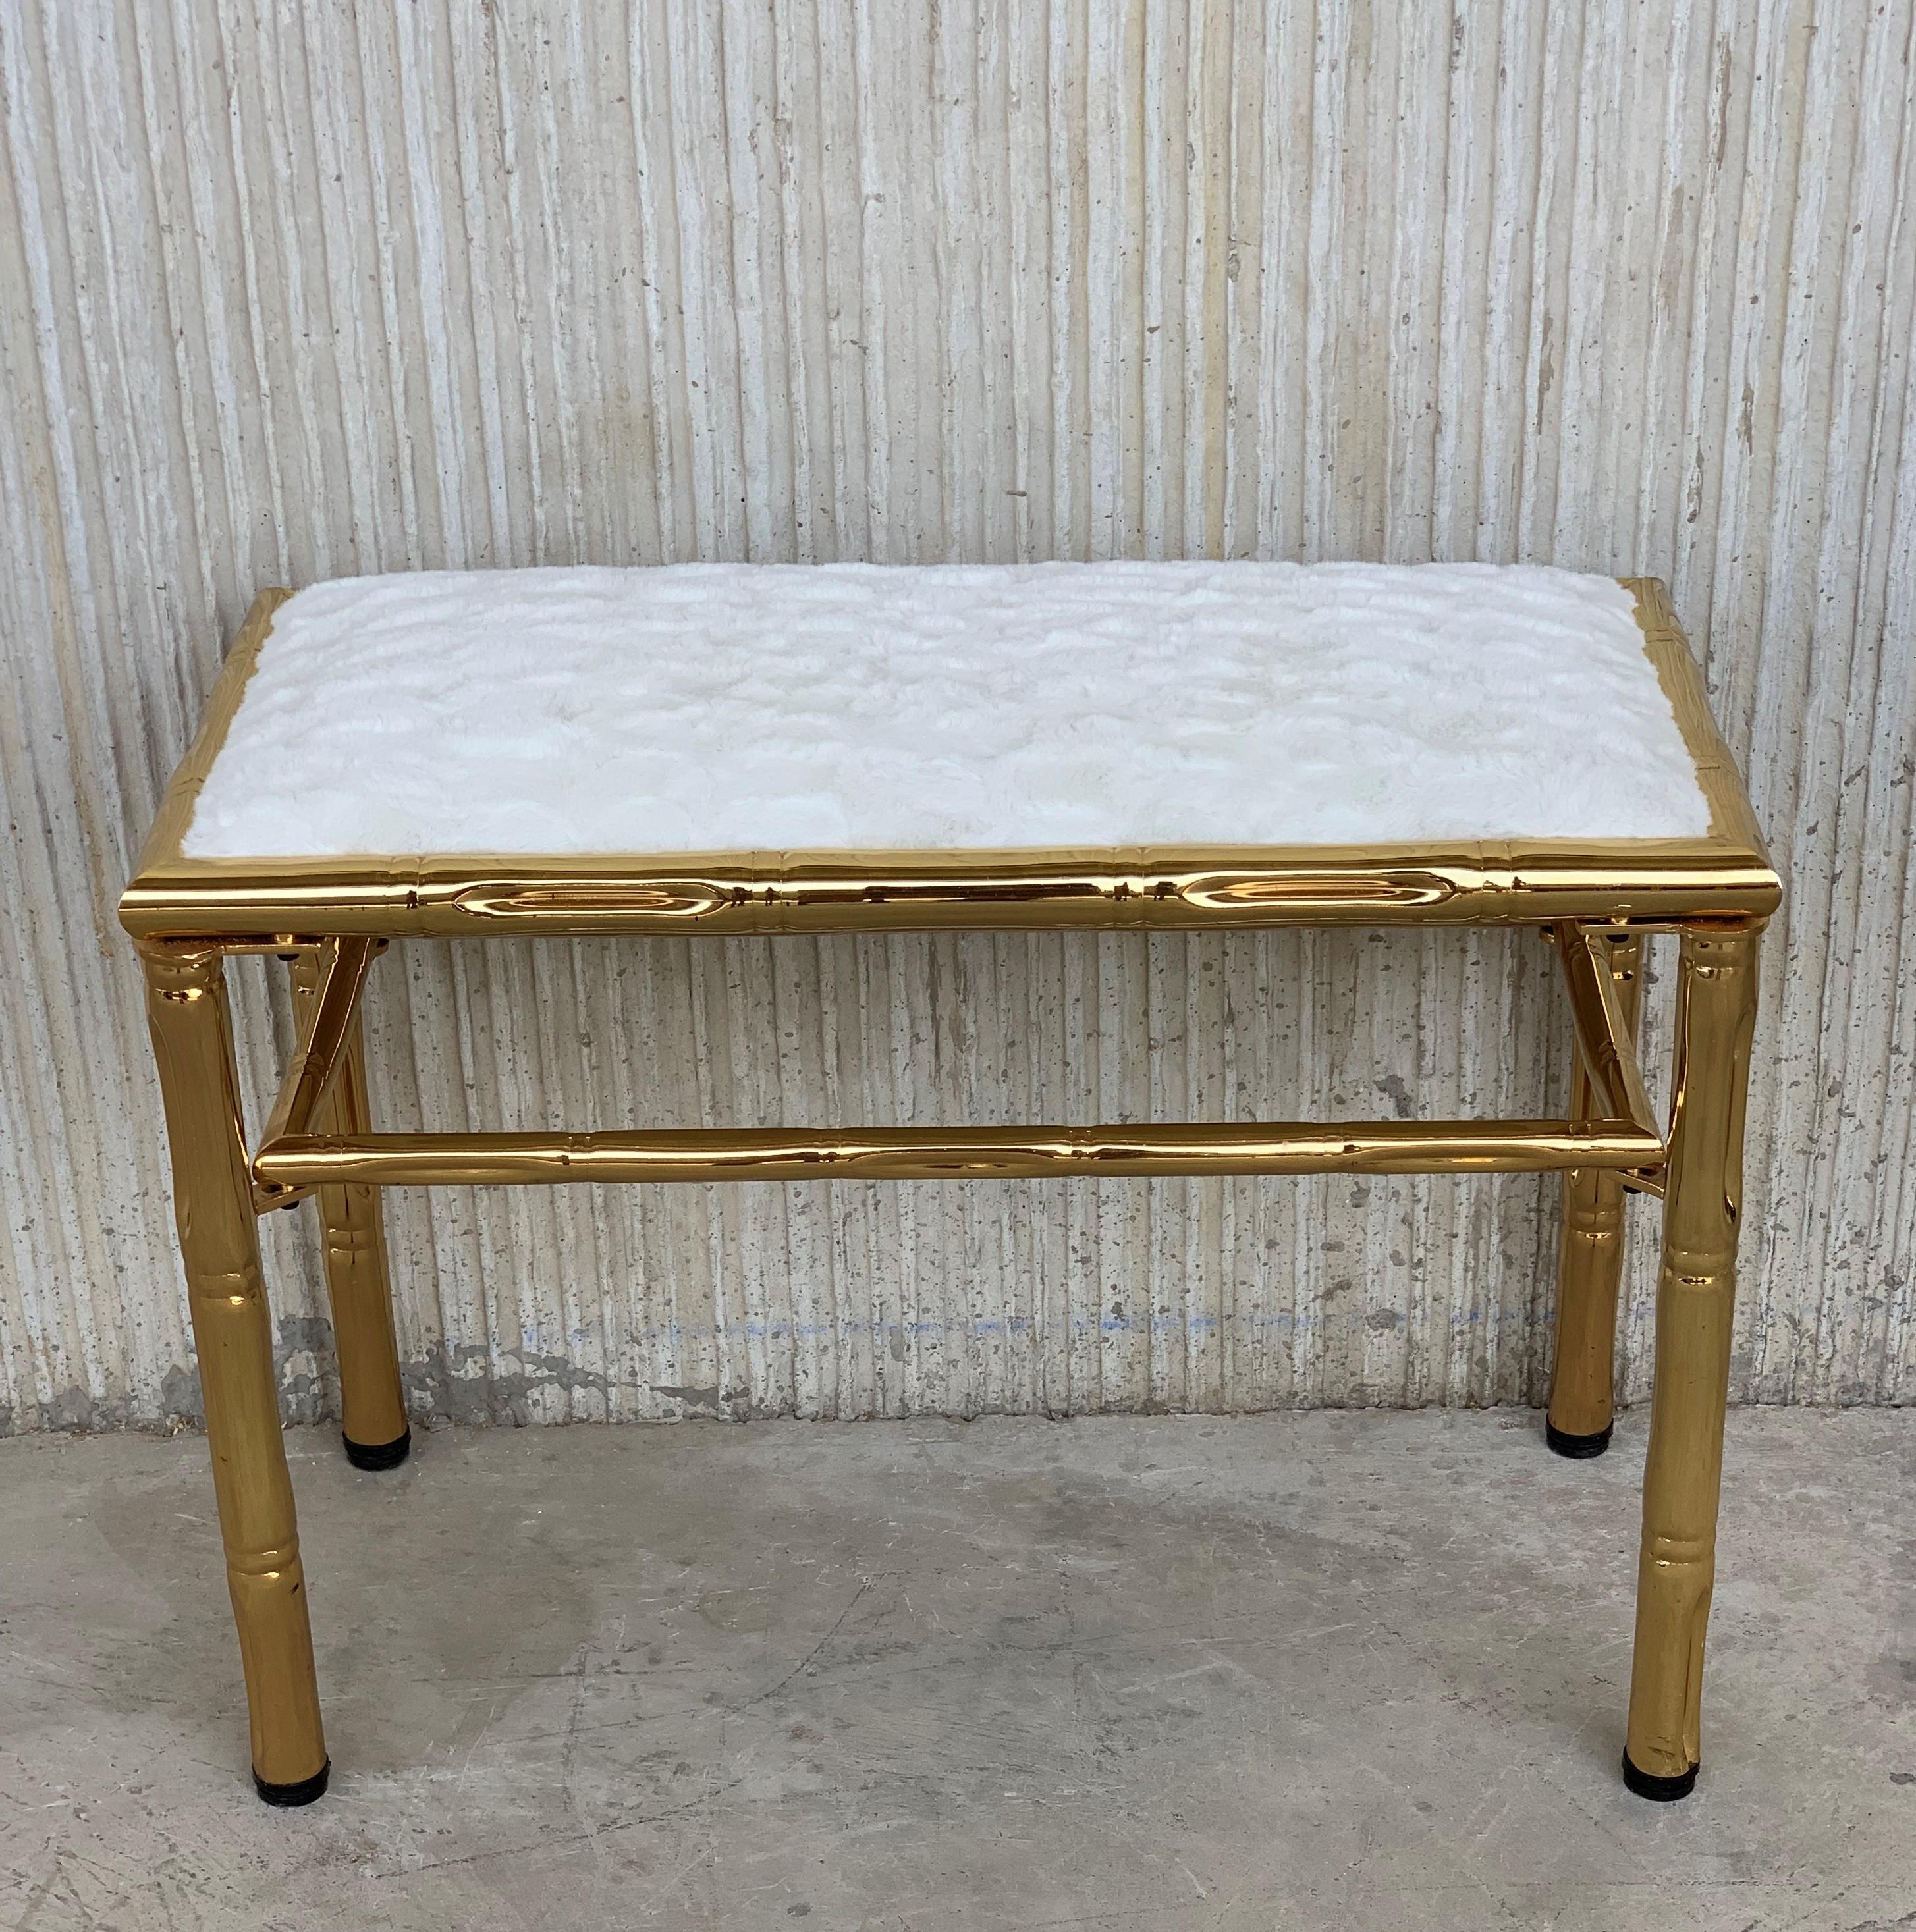 Mid-Century Modern Italian Faux Bamboo Gilt Metal Bench with White Velvet In Good Condition For Sale In Miami, FL